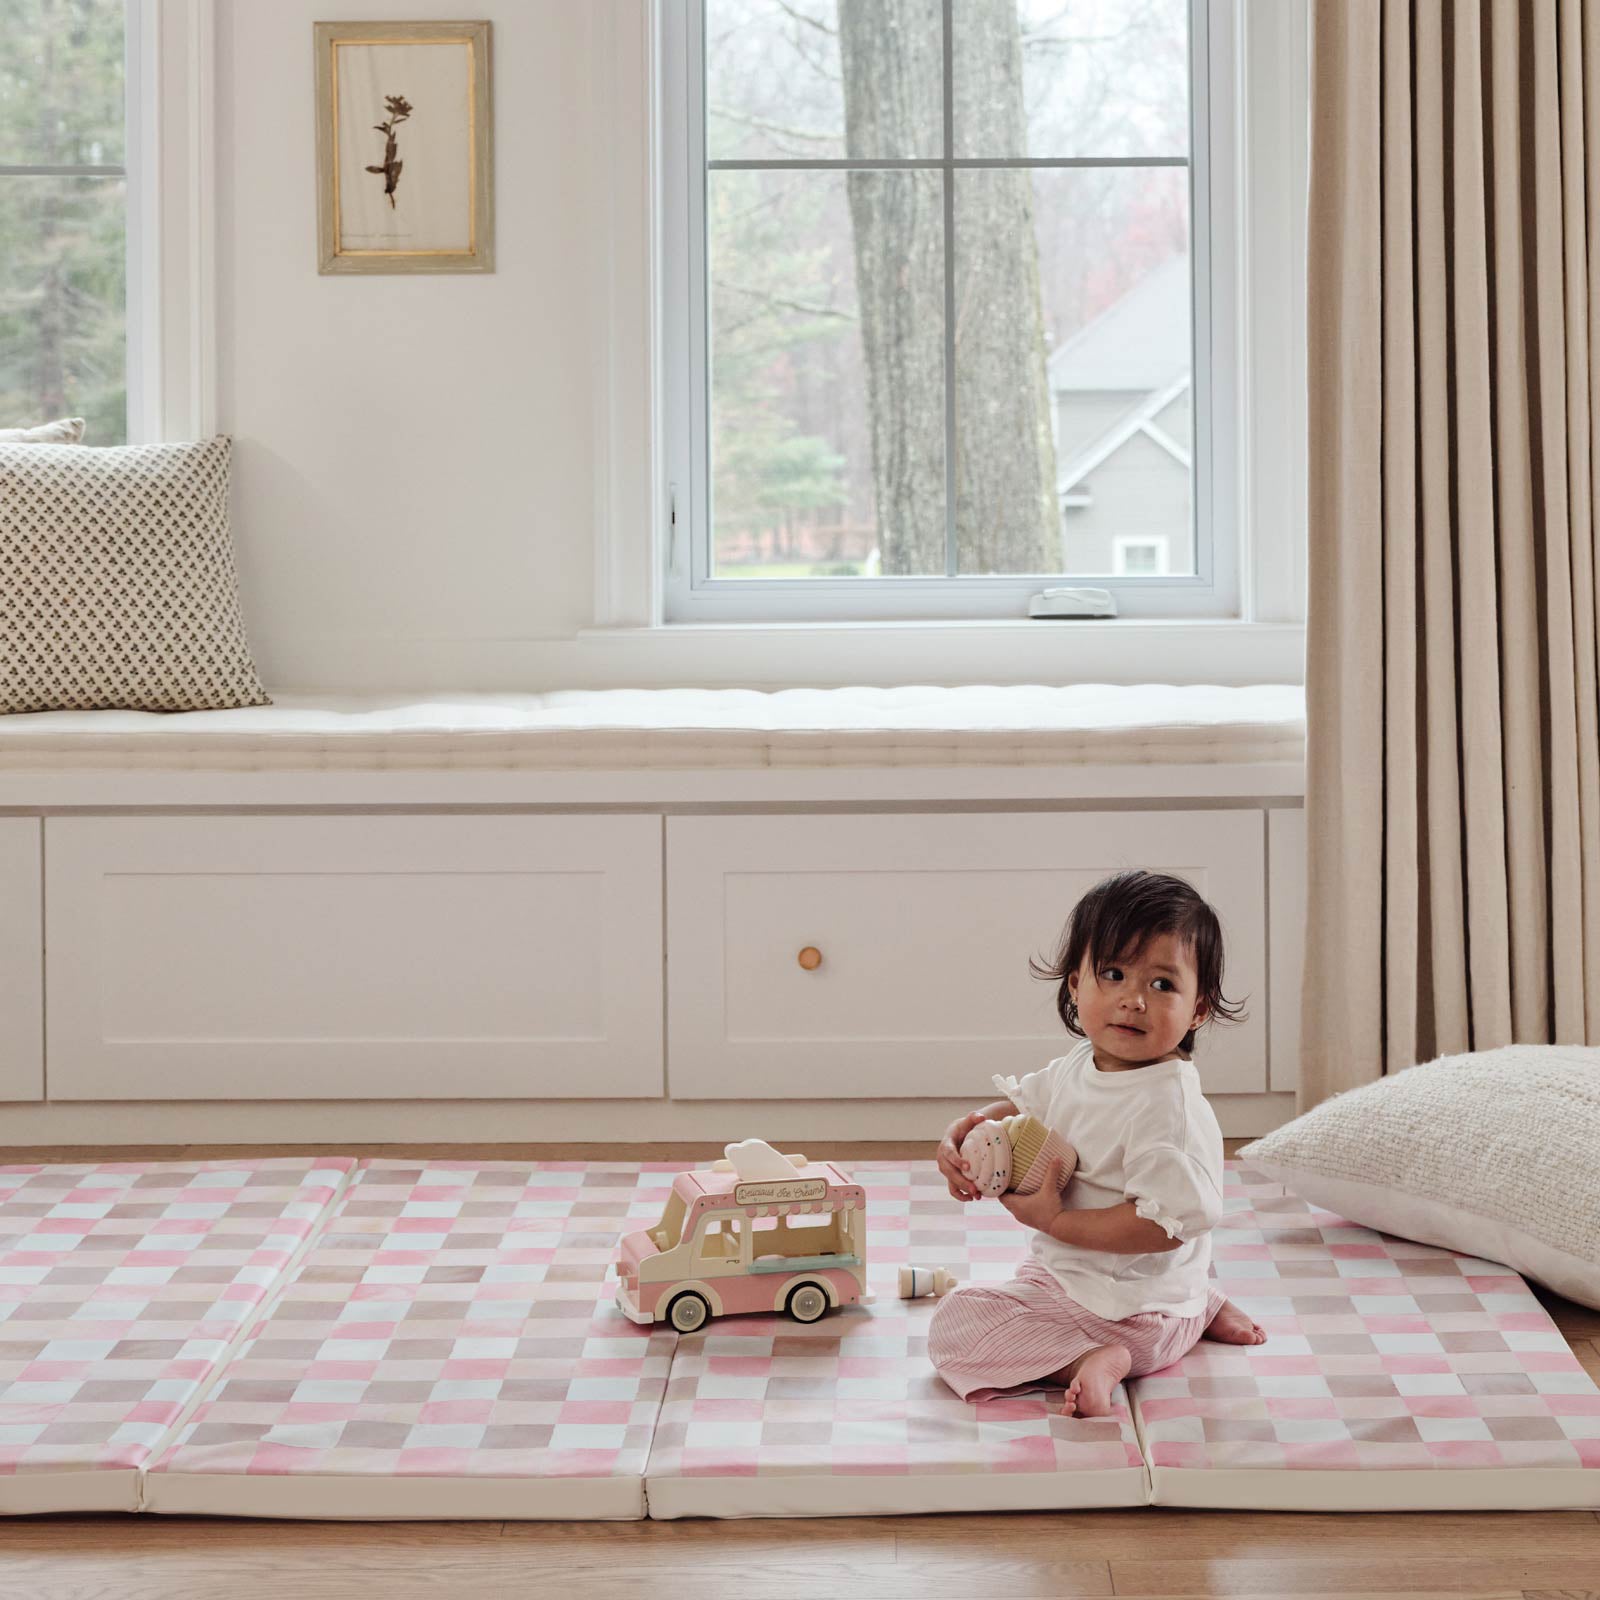 Pink and brown gingham print tumbling mat in the color Neapolitan shown in living room with toddler girl playing with ice cream truck toy on the mat